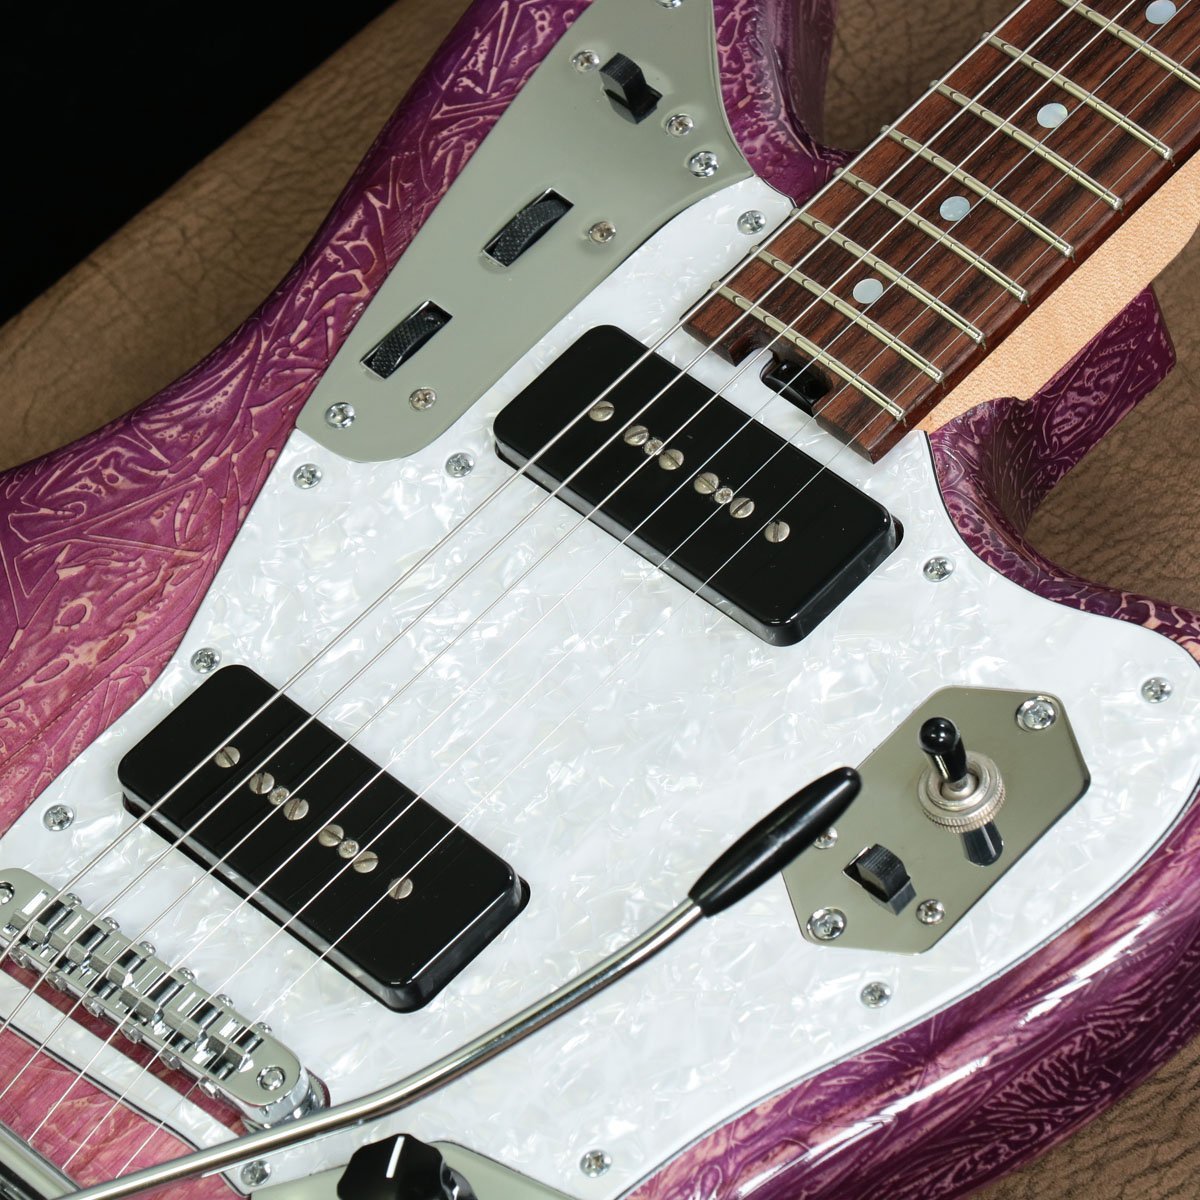 Sago W-JAG Special P-90 Light Weight Ash See-through Wrap Purple 